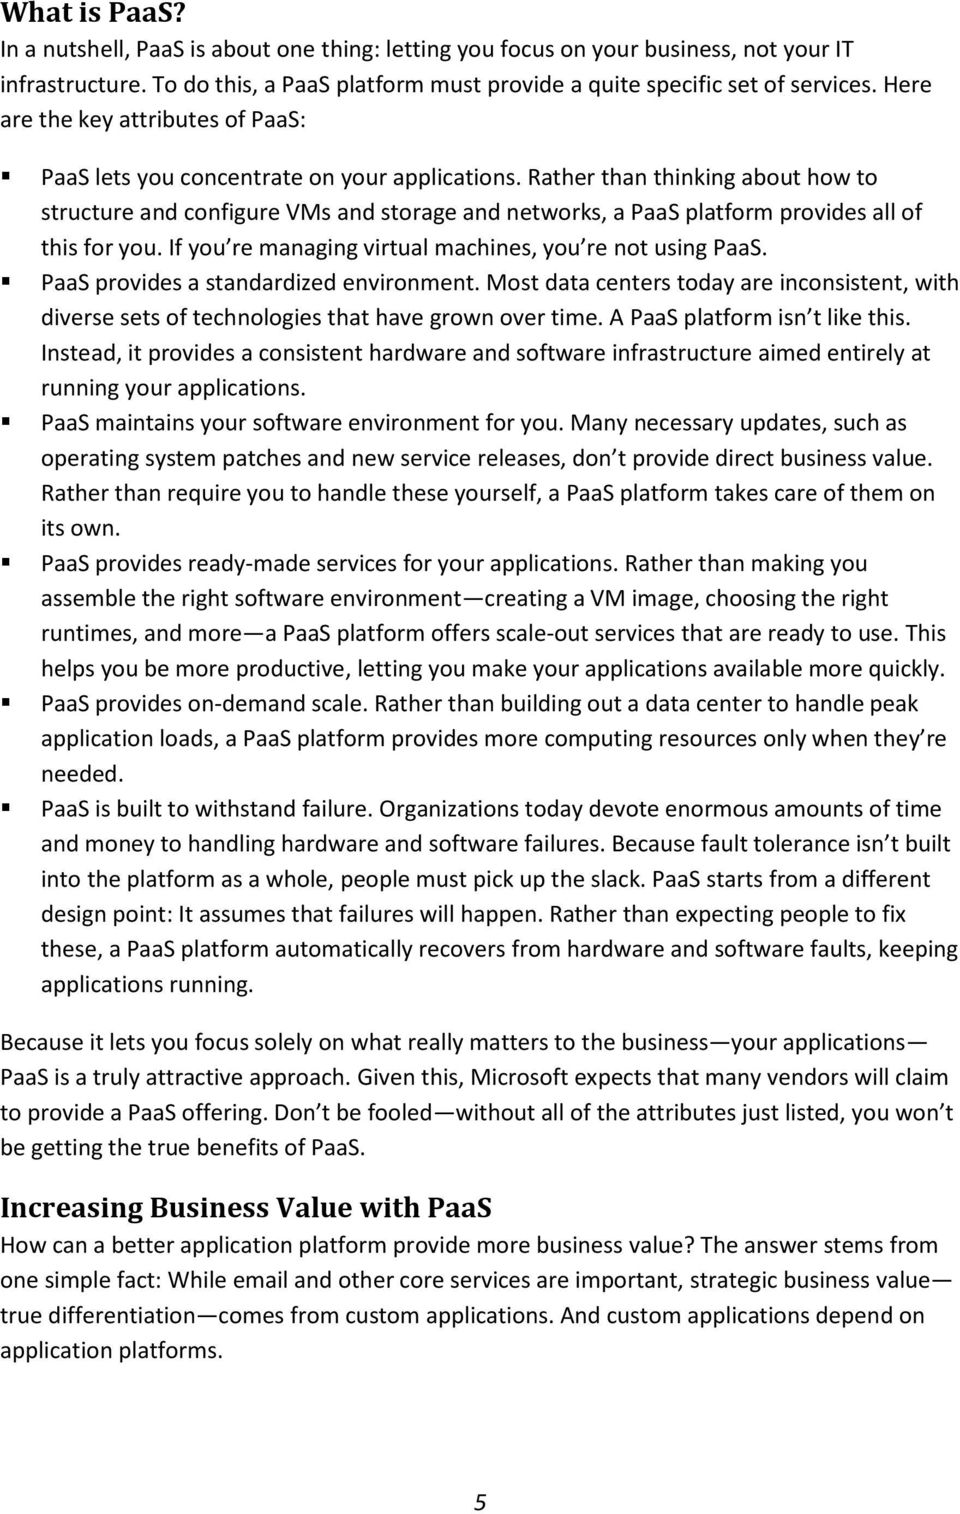 Rather than thinking about how to structure and configure VMs and storage and networks, a PaaS platform provides all of this for you. If you re managing virtual machines, you re not using PaaS.